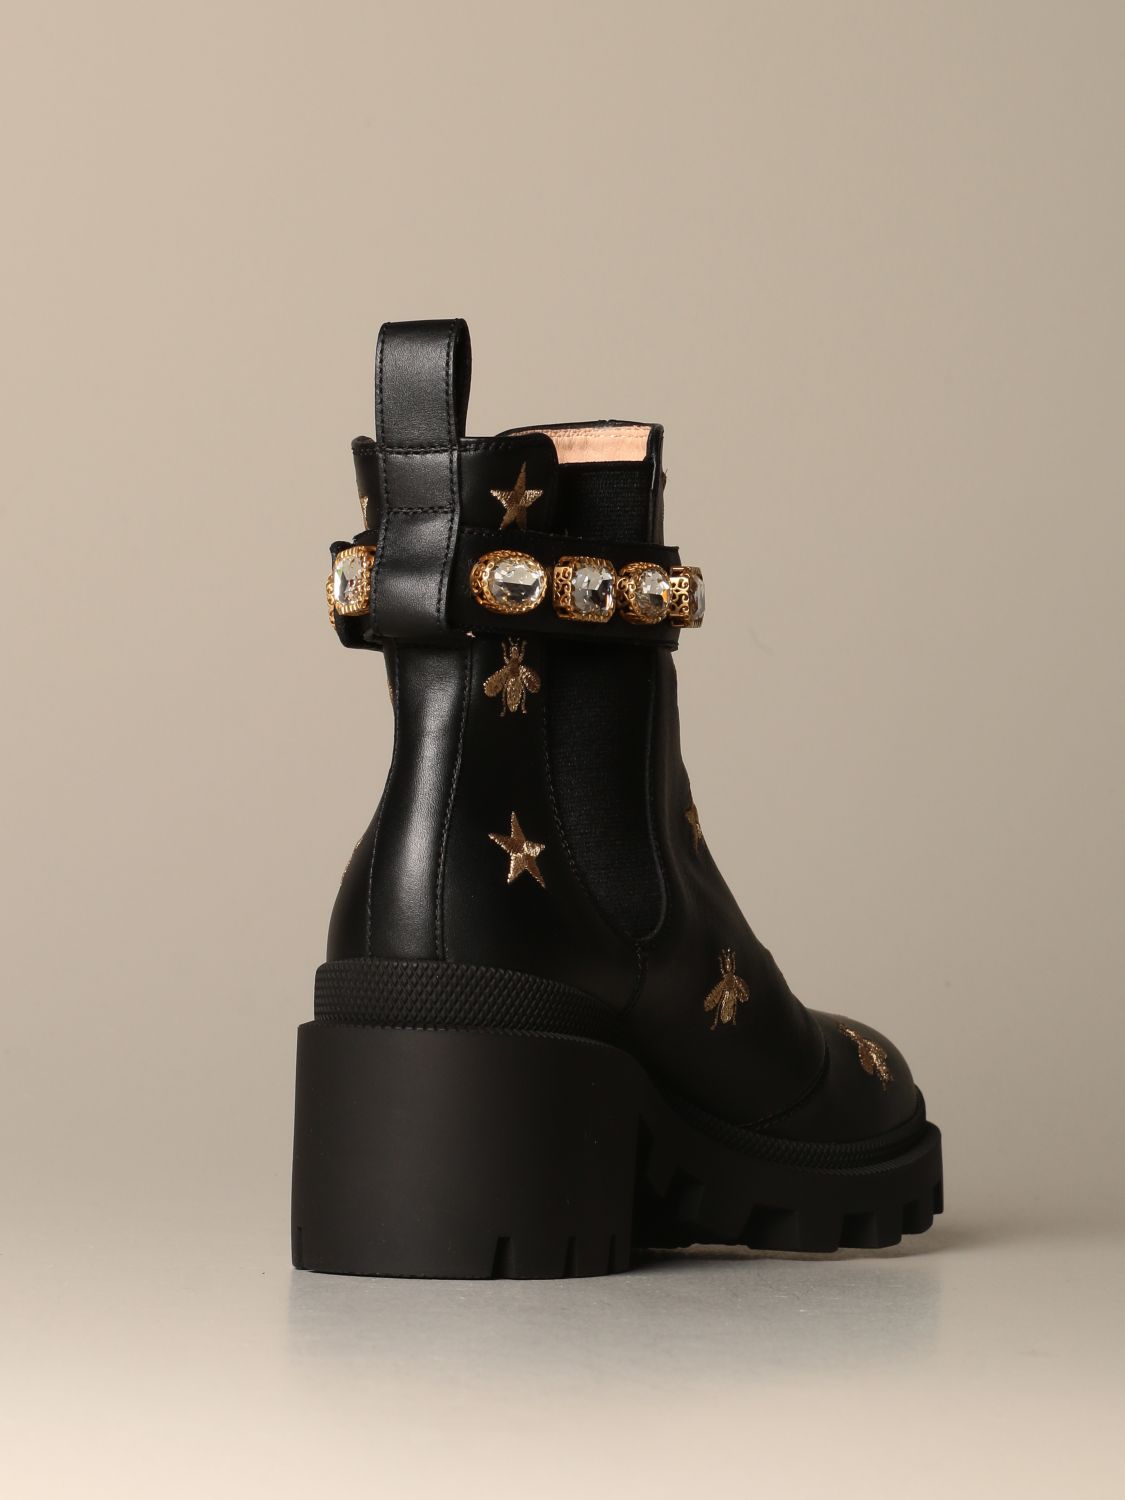 gucci boots with stars and bees